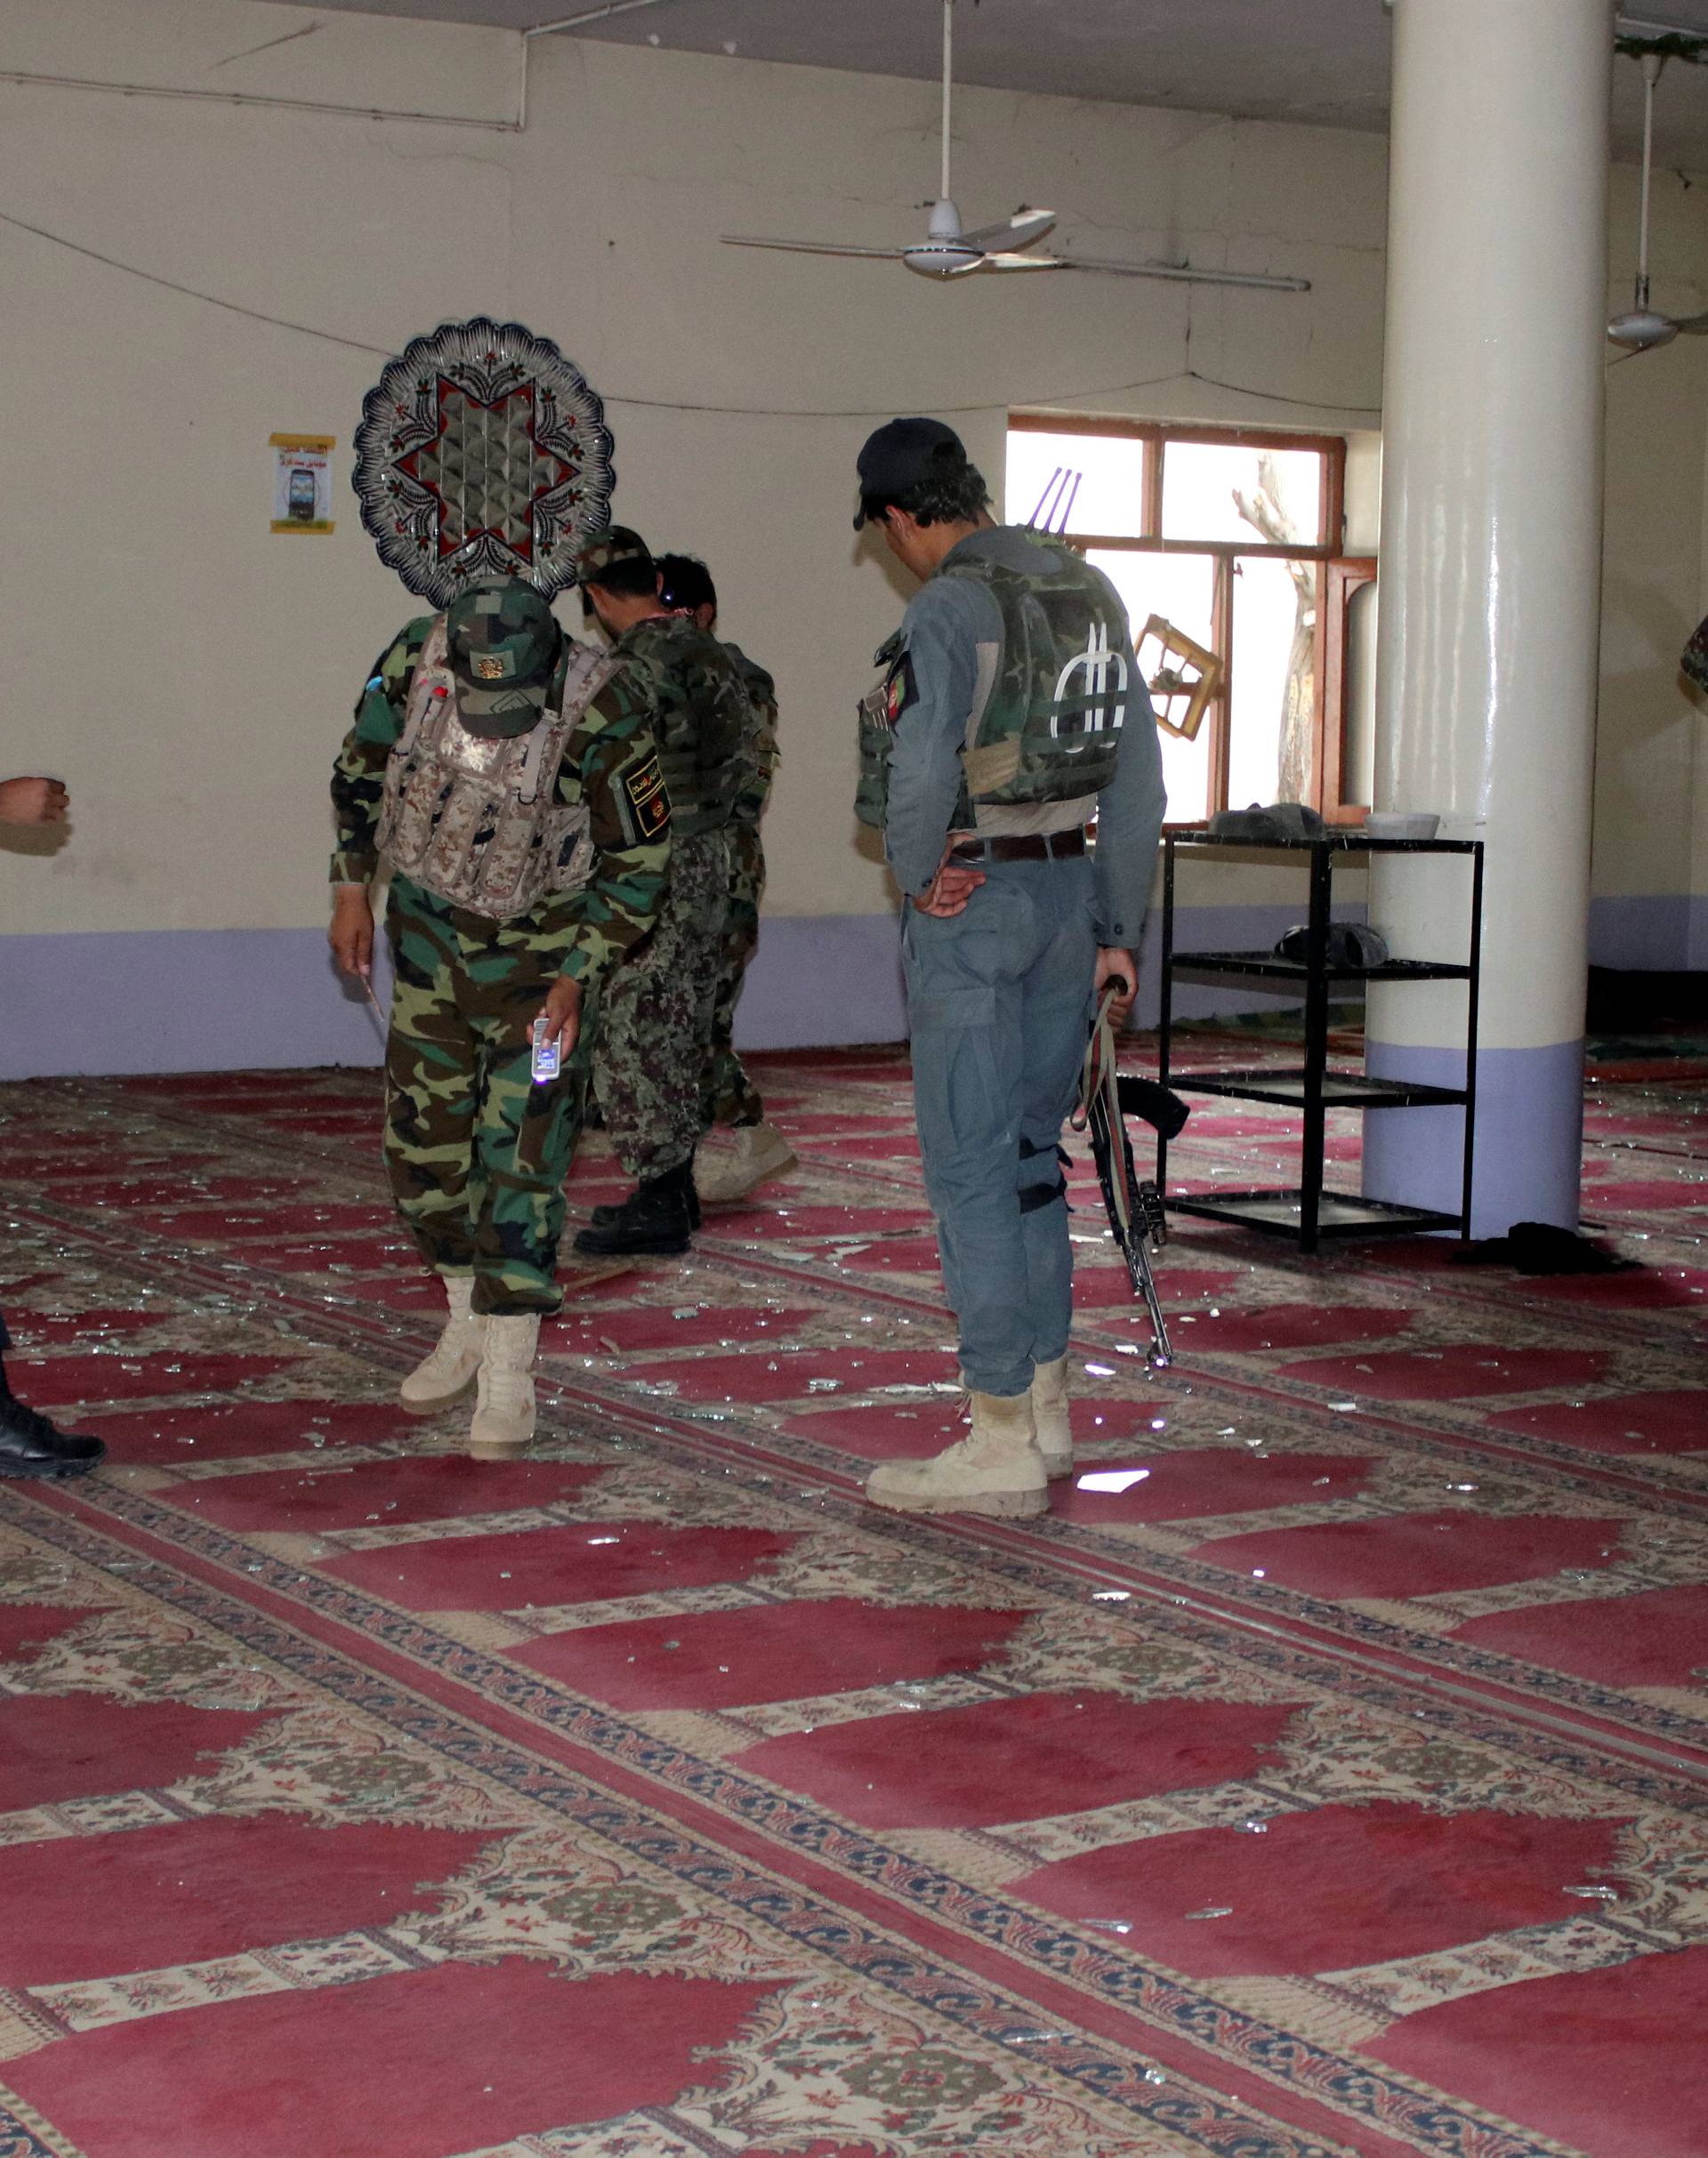 Afghan policemen inspect a mosque after a blast in Khost province